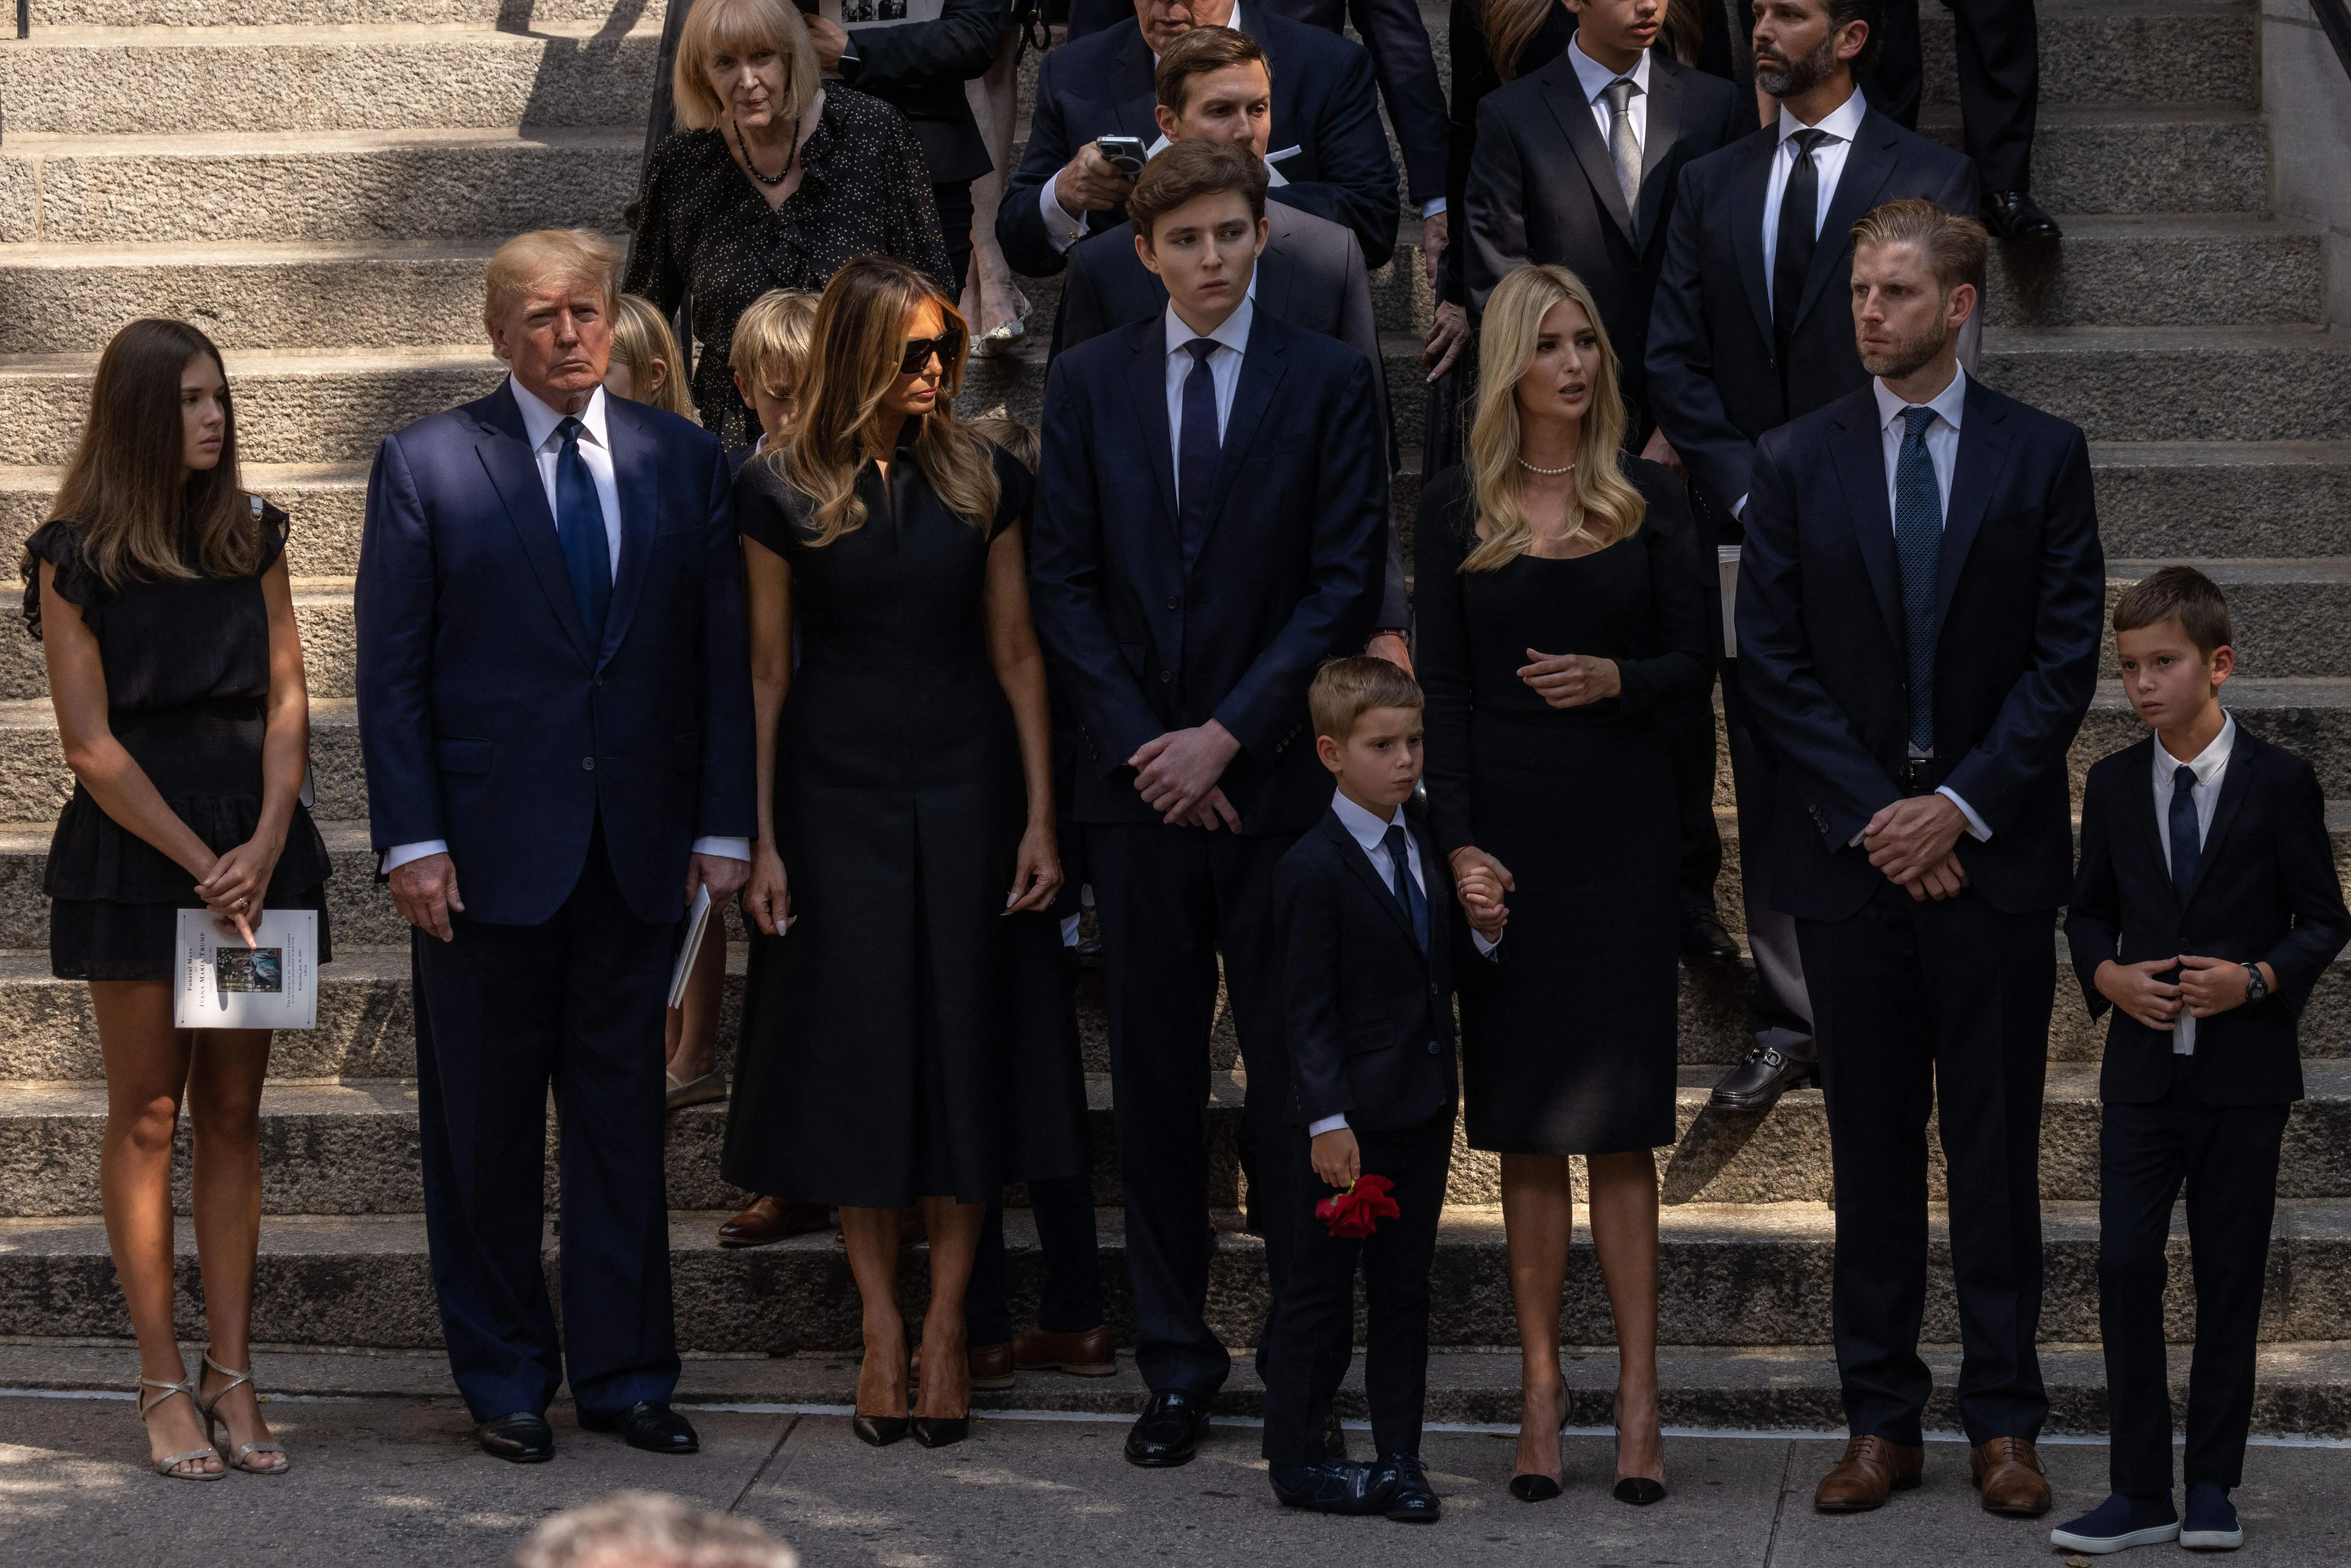 Former President Donald Trump, former First Lady Melania Trump, Barron Trump, Ivanka Trump, Eric Trump, and other relatives stand outside of St. Vincent Ferrer Roman Catholic Church after the funeral services of Ivana Trump in New York, on July 20, 2022.?w=200&h=150